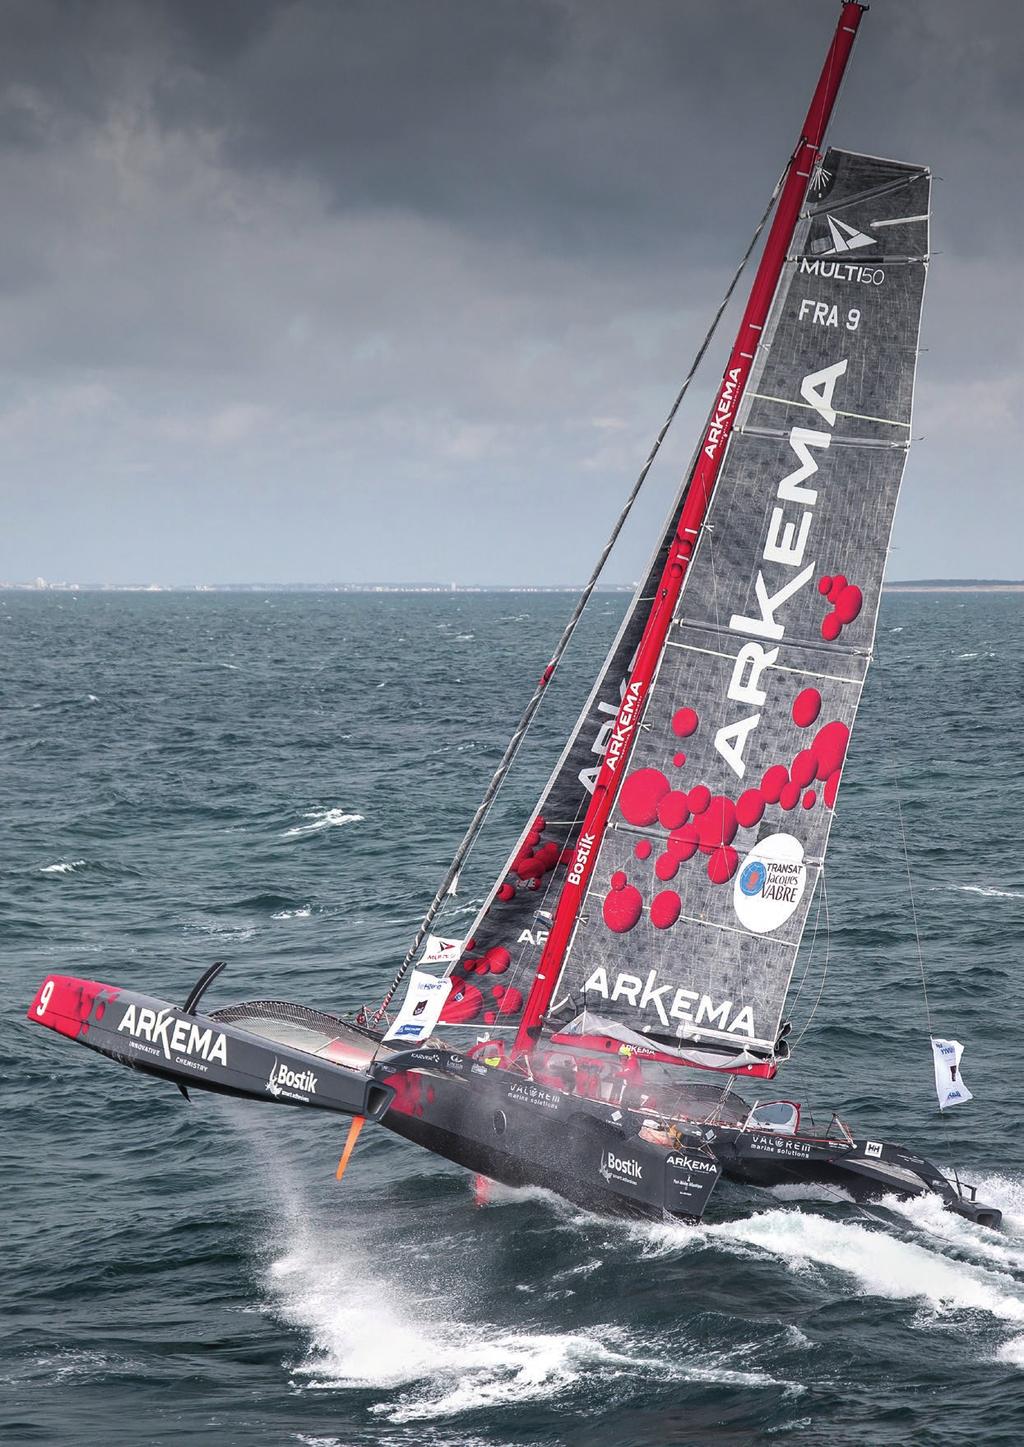 THE MULTI50 ARKEMA, AN EVER IMPROVING ULTRA COMPETITIVE TRIMARAN Built in the heart of the Médoc region in 2012, the Multi50 Arkema is the very representation of Lalou s commitment to scheduling his